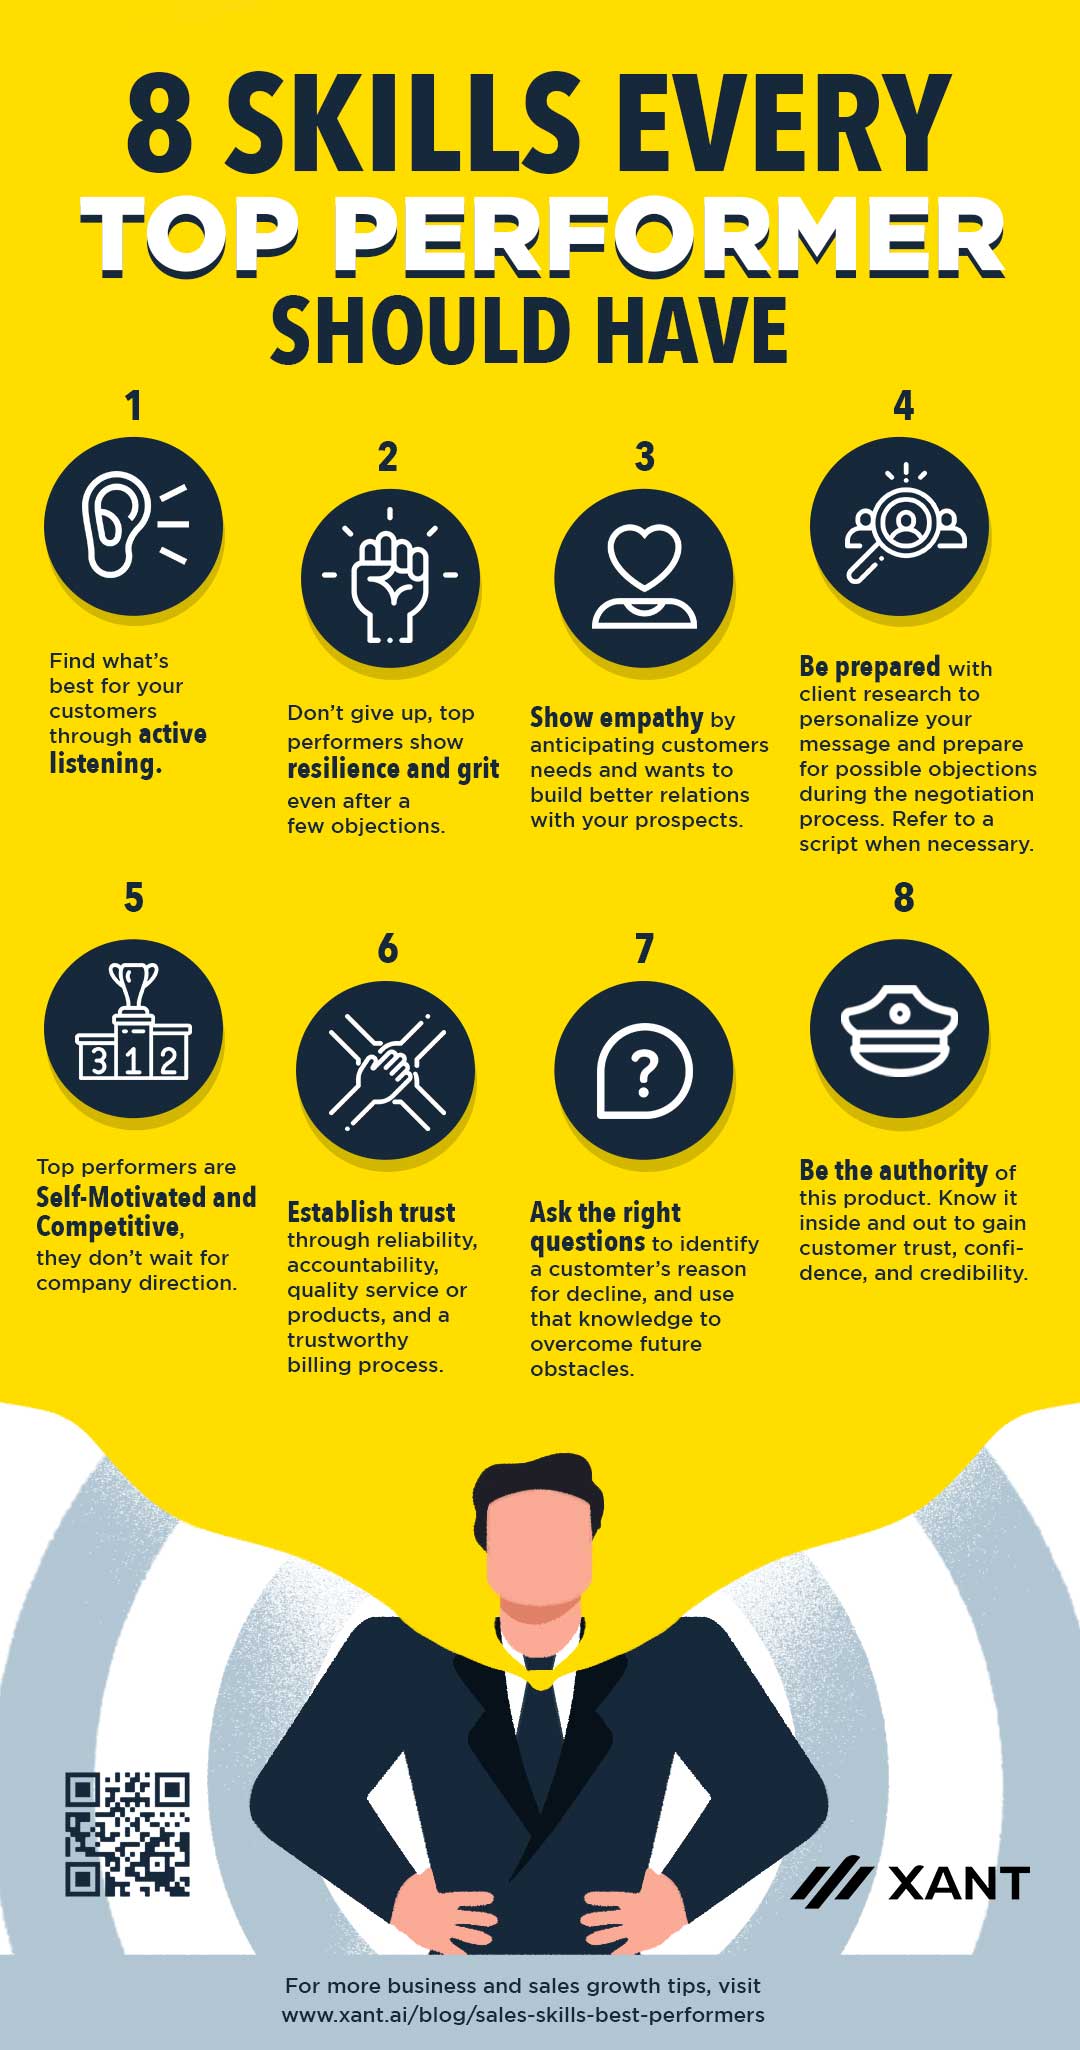 8 Salesperson Skills Of Top Performers: 1. Active Listening 2. Resilience and grit 3. Show empathy 4. Be prepared 5. Self-motivated and competitive 6. Establish trust 7. Ask the right questions 8. Be the authority [INFOGRAPHIC] | https://www.insidesales.com/blog/sales-management/sales-skills-best-performers/